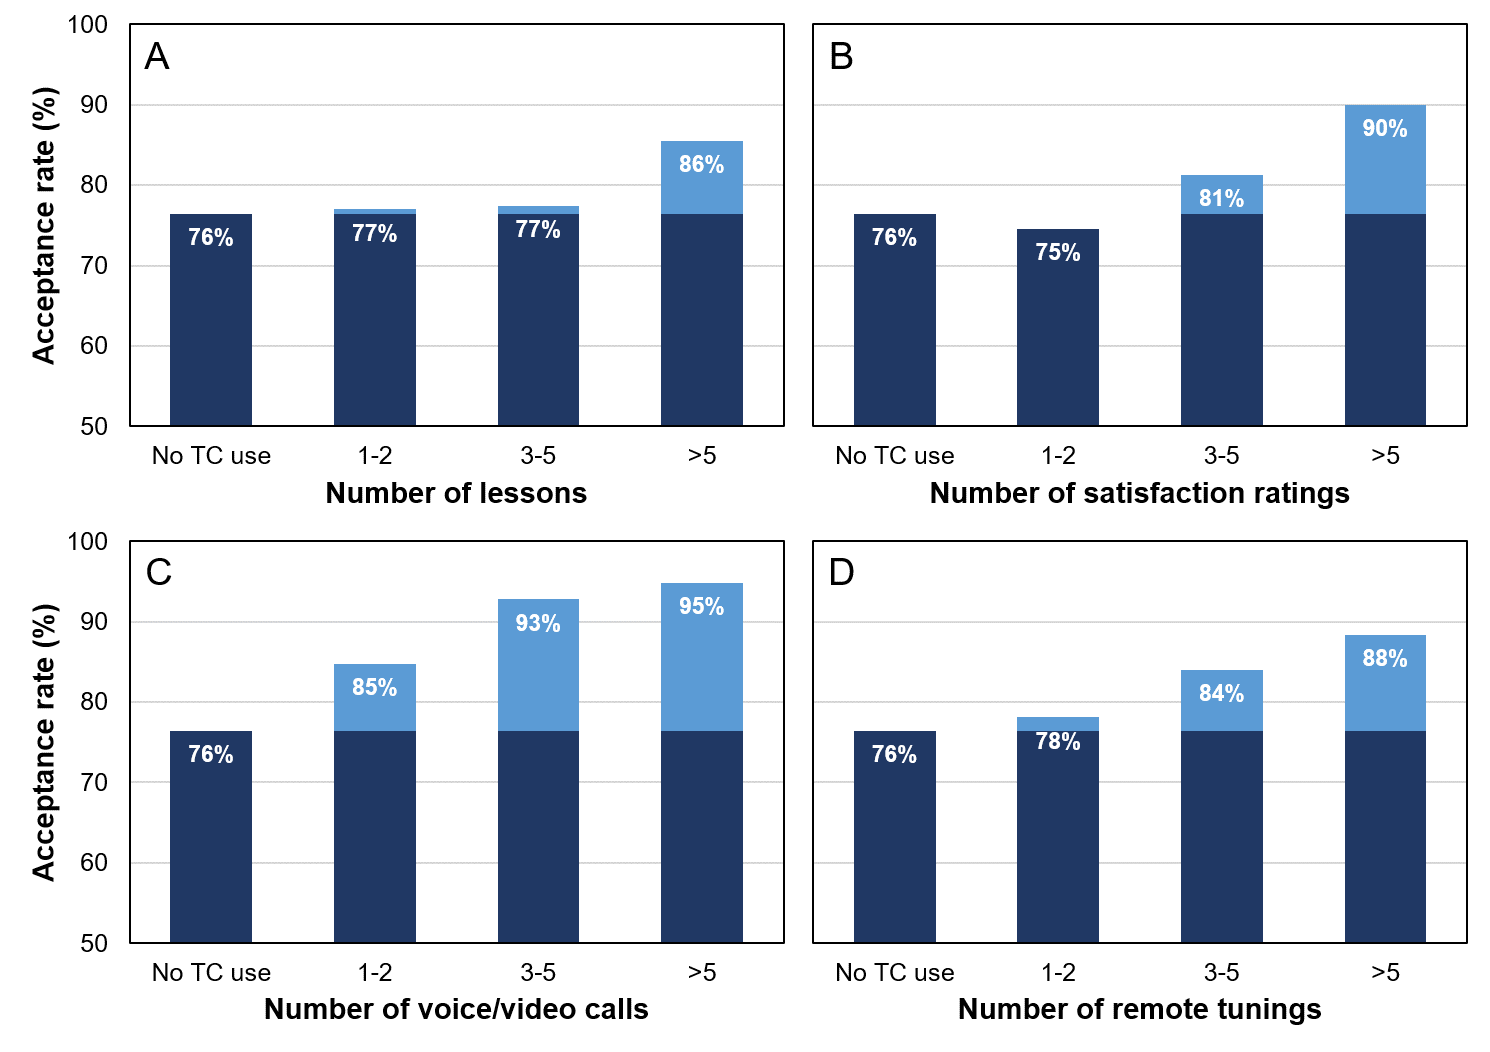 Acceptance rates observed for different levels of interaction with four TeleCare features